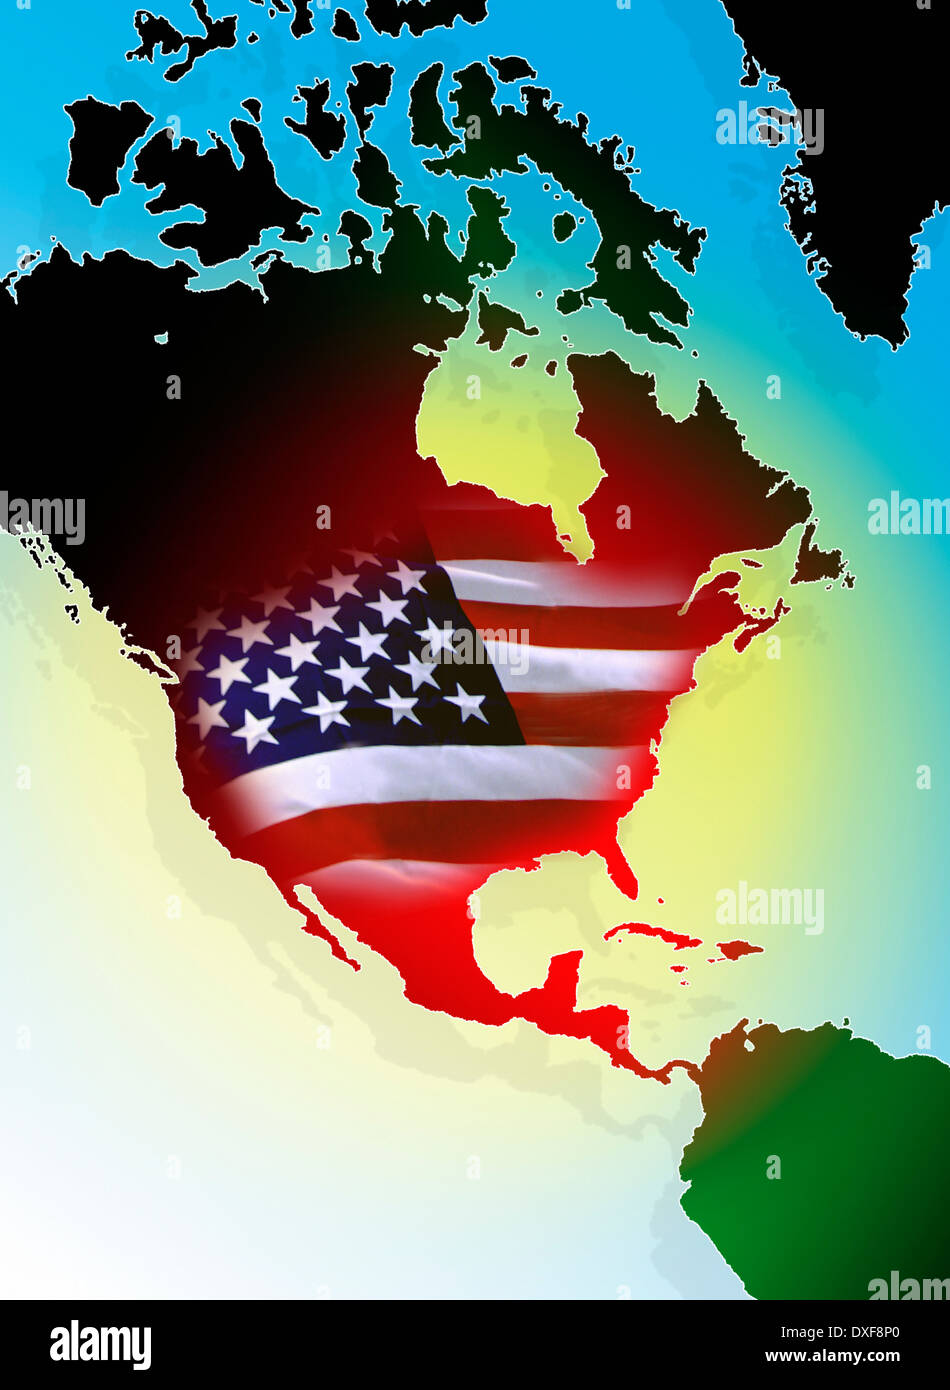 North American continent with the flag of the United States of America Stock Photo